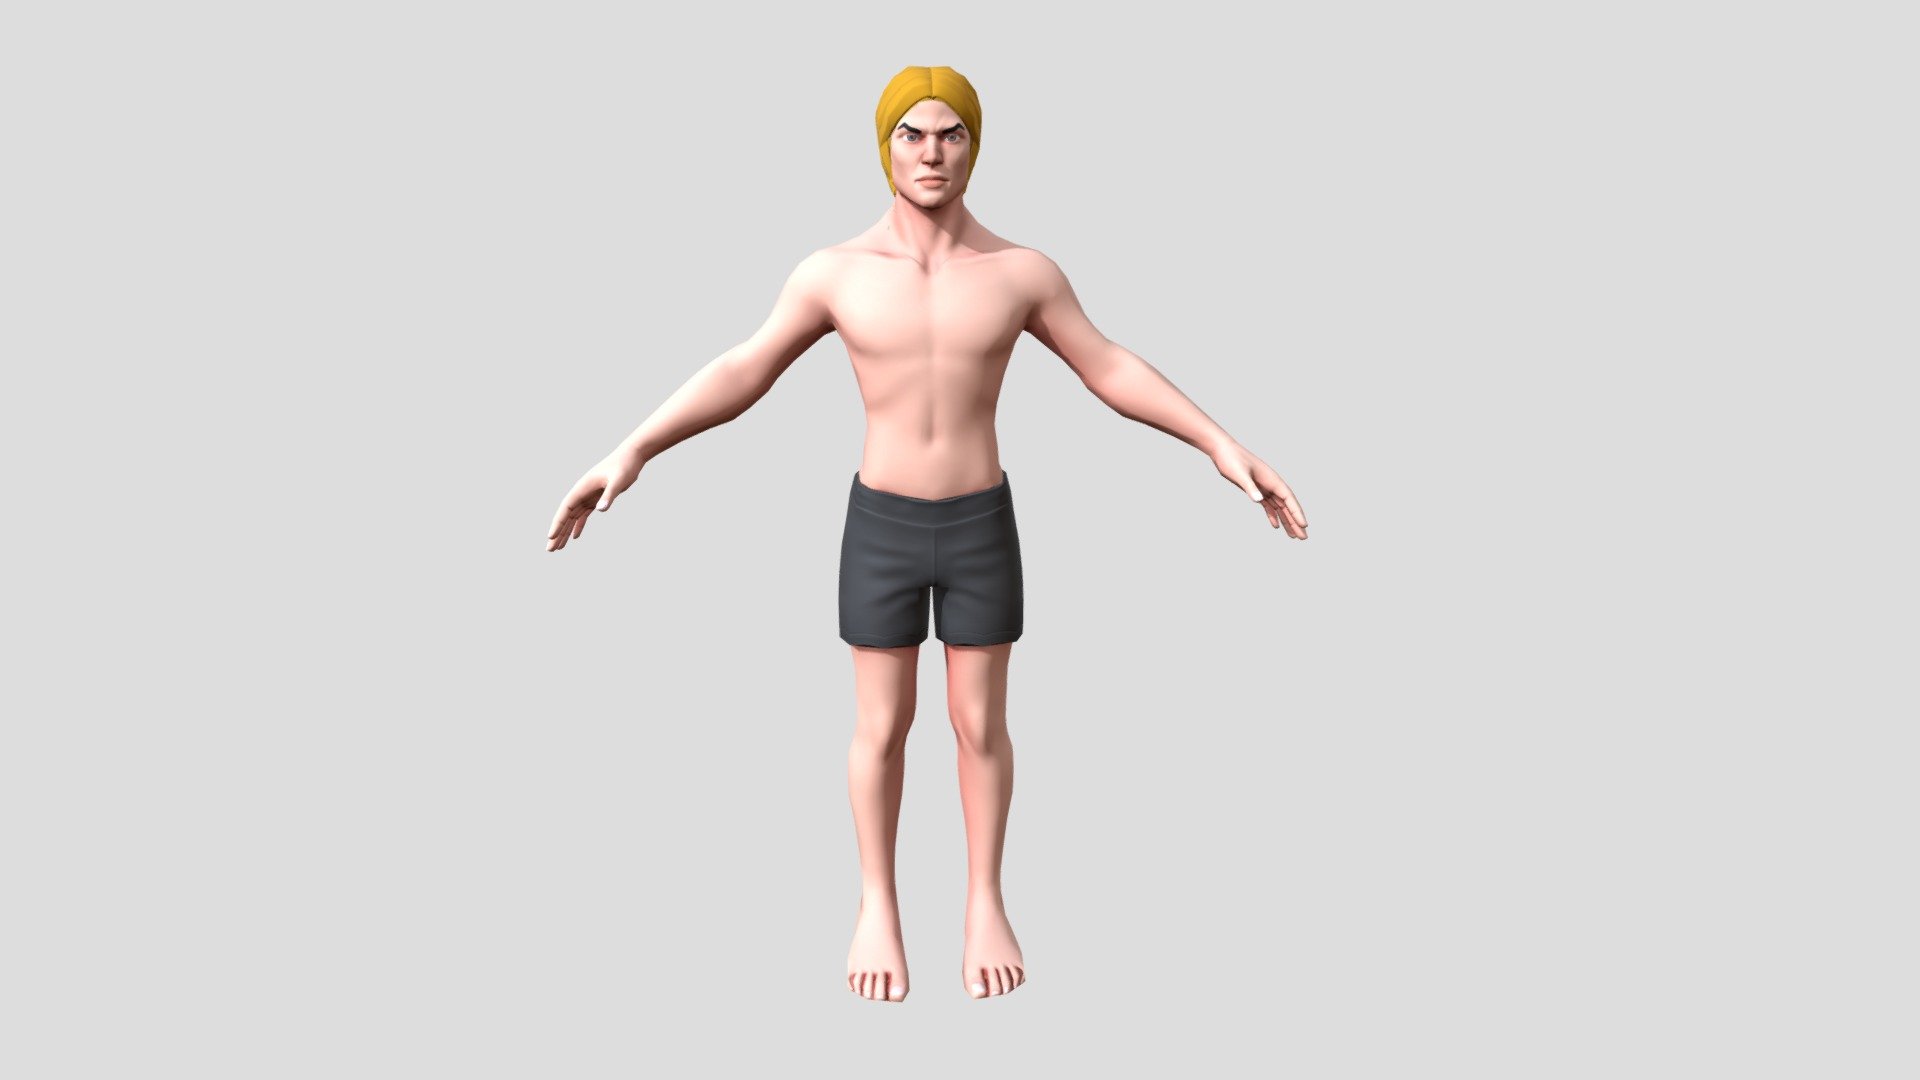 This is Ricky, a low poly male character done in Blender3d. Its game ready

Its Mobile and Pc Ready. It can be used in Unity3d, Unreal Engine, Mixamo&hellip;

If you need any customized model, Contact us

If you want to buy any of our another game ready models check these links:


Kirah - Game Ready Female
Kiroh - Game Ready Male
Roxane - Female Game Ready
Roxane - Gym Female Game Ready
Karlota - Gym Female Game ready
Aaron - Gym Male Game ready
Laia - Female Warrior Game Ready
Jennifer - Female Game Ready Horror
Kirah (with Clothes) - Game ready Female 
Kiroh (with Clothes - Game Ready Male
 - Stylized Male Character - Game Ready Base mesh - Buy Royalty Free 3D model by Your 3D Character (@your3dcharacter) 3d model